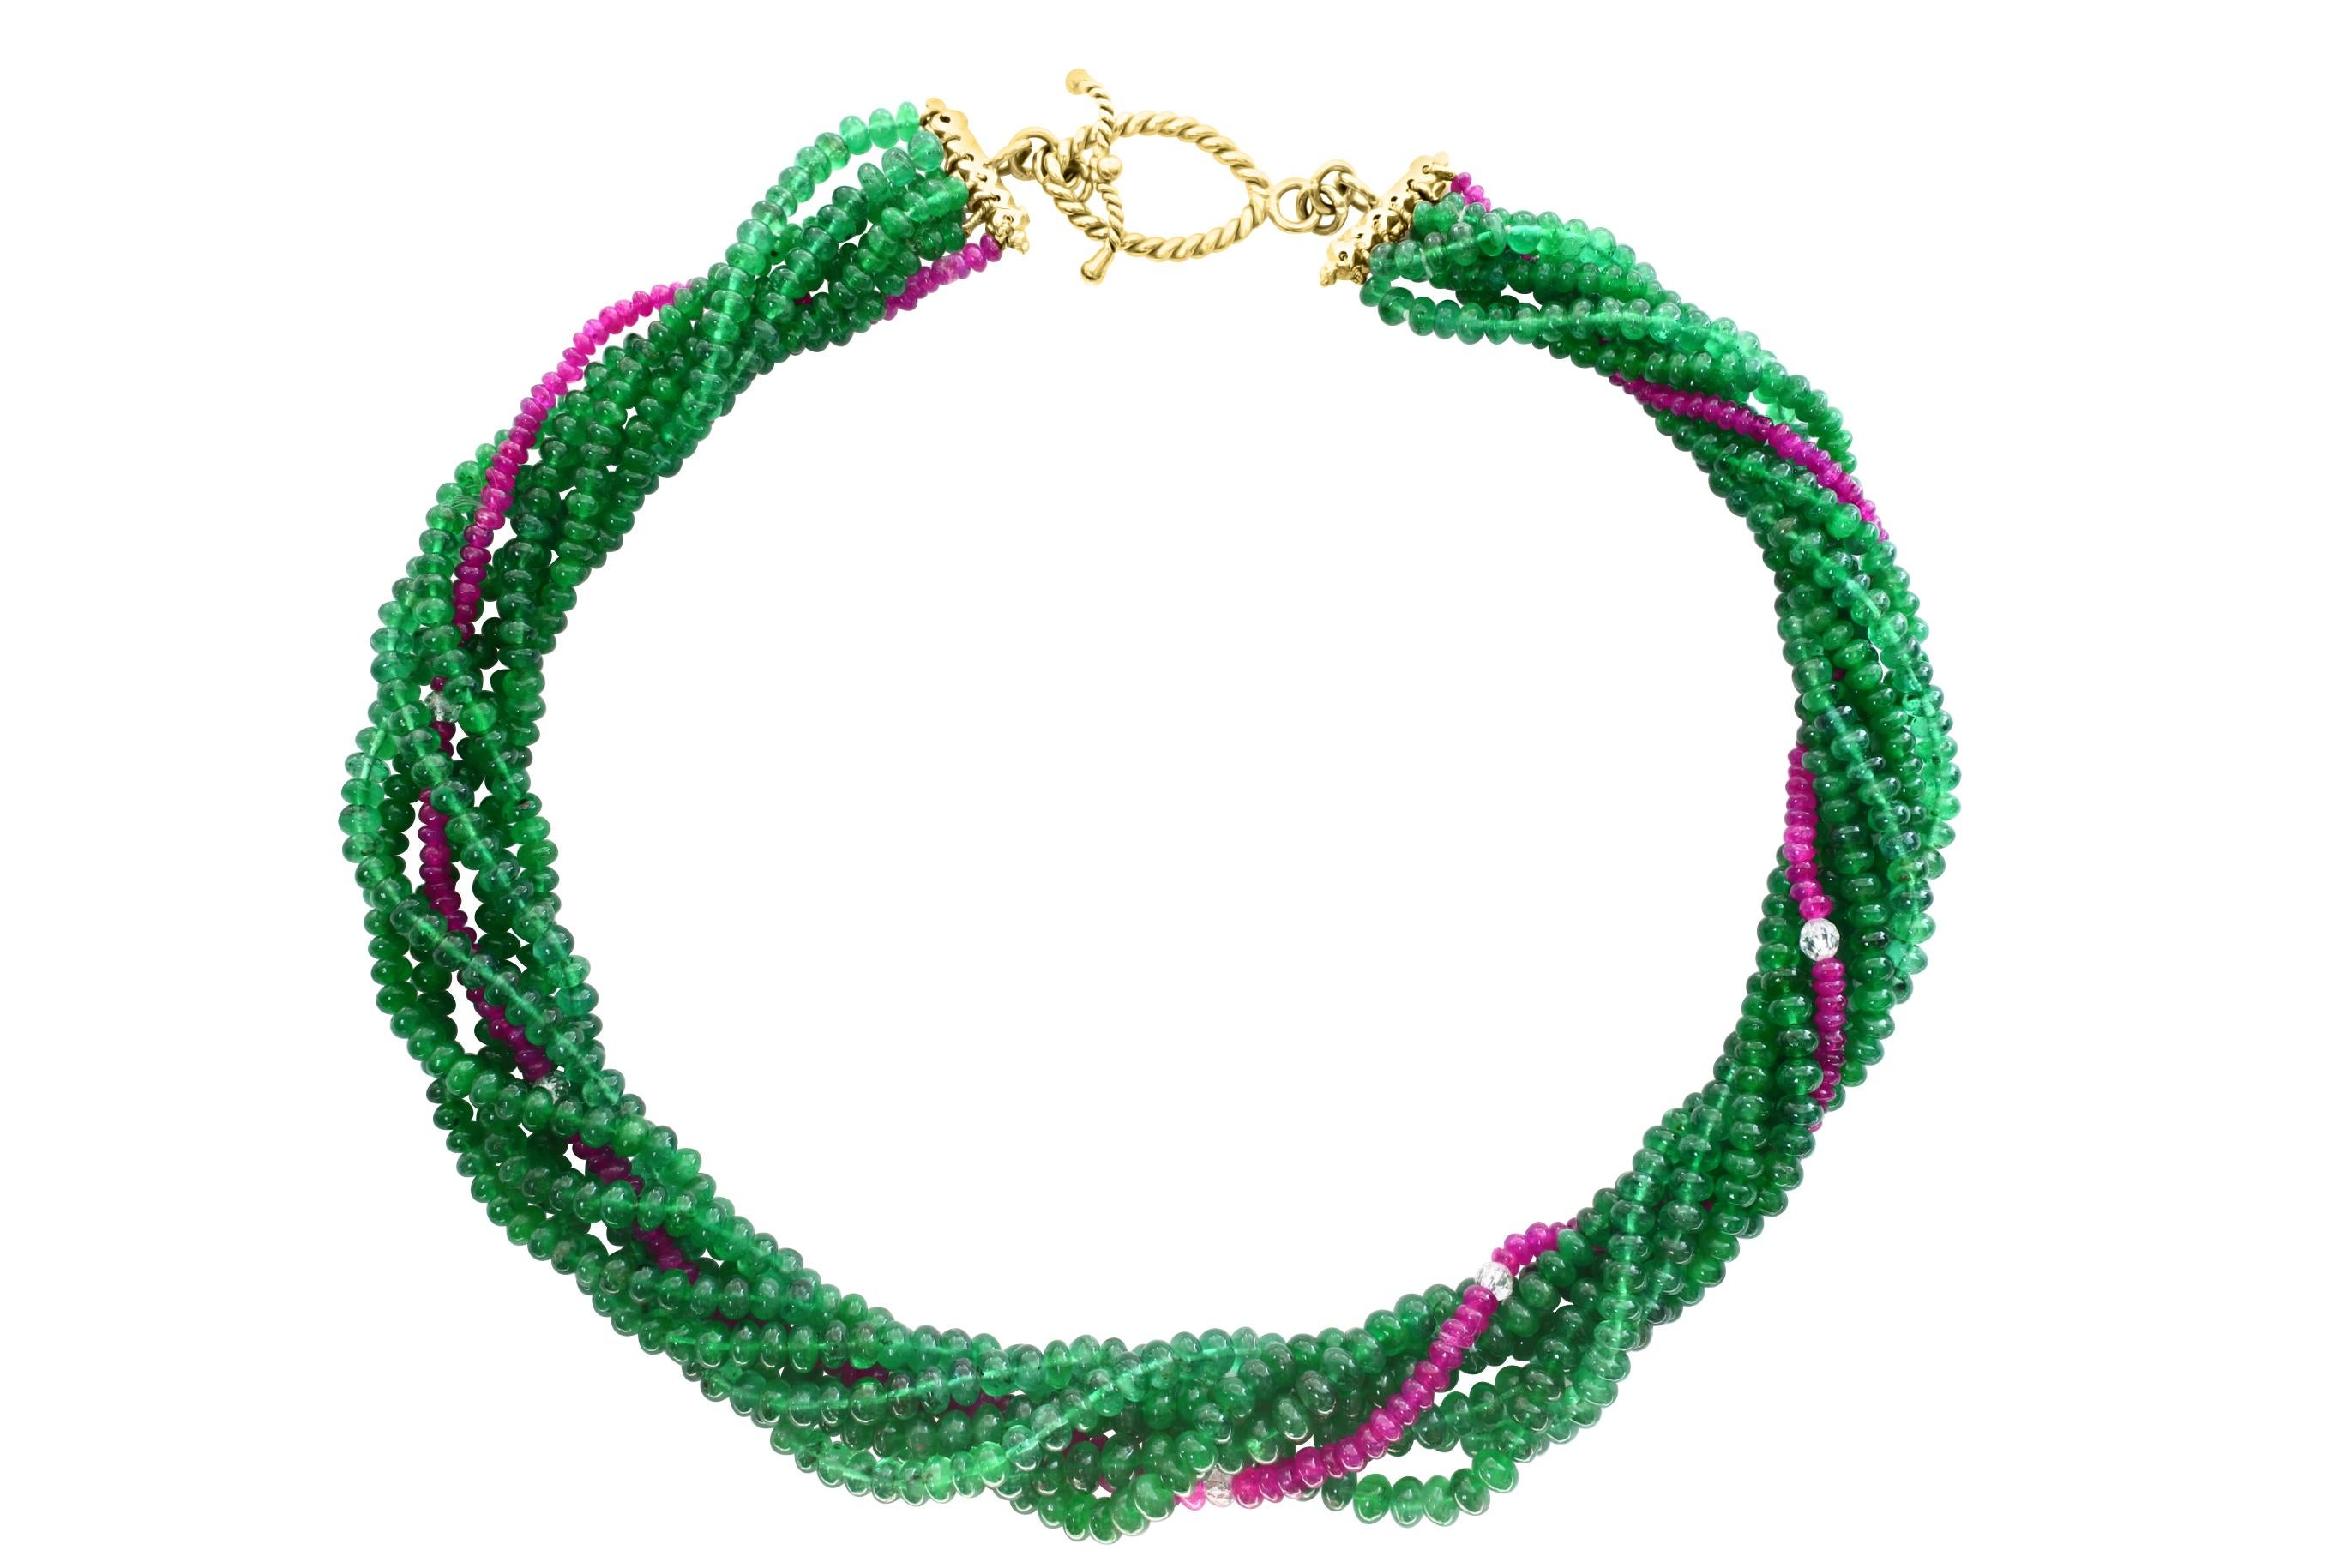 360 Carat  Emerald , Ruby & Diamond Beads Necklace 18 Karat Yellow Gold 16 Inch
This spectacular Necklace   consisting of approximately 360 Ct  of fine beads.
 There are  6 rows of fine Emerald Beads  and one row of fine Burma  ruby beads with 5